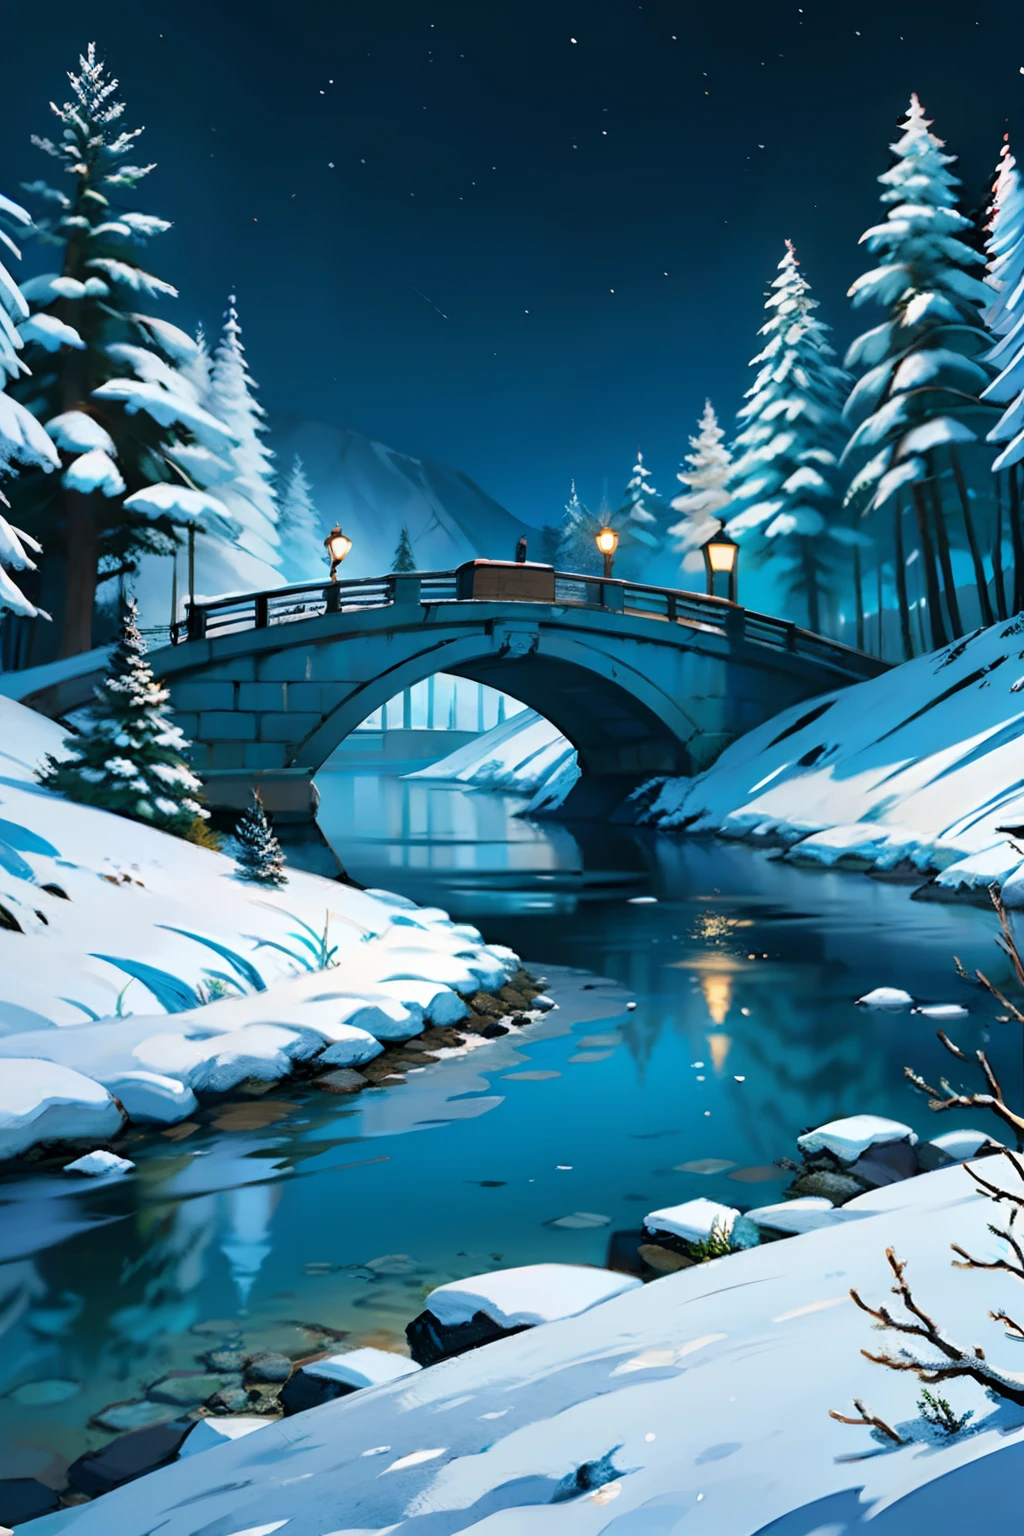 A painting of a winter landscape, pine trees, snow on ground, a winding river with a broken down bridge, eerie night time light, dark sky.